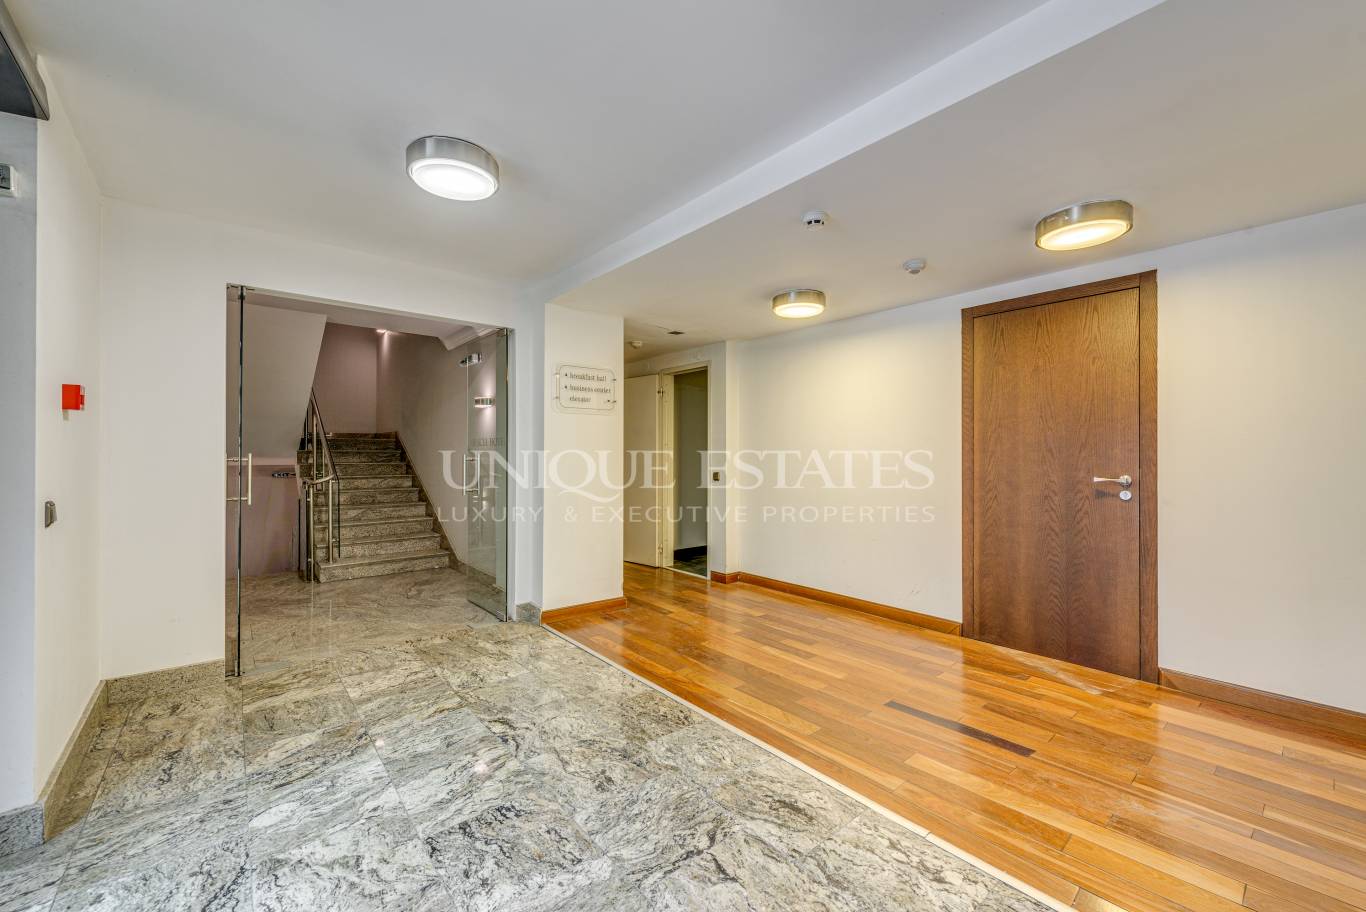 Office for rent in Sofia, Downtown with listing ID: K13585 - image 3